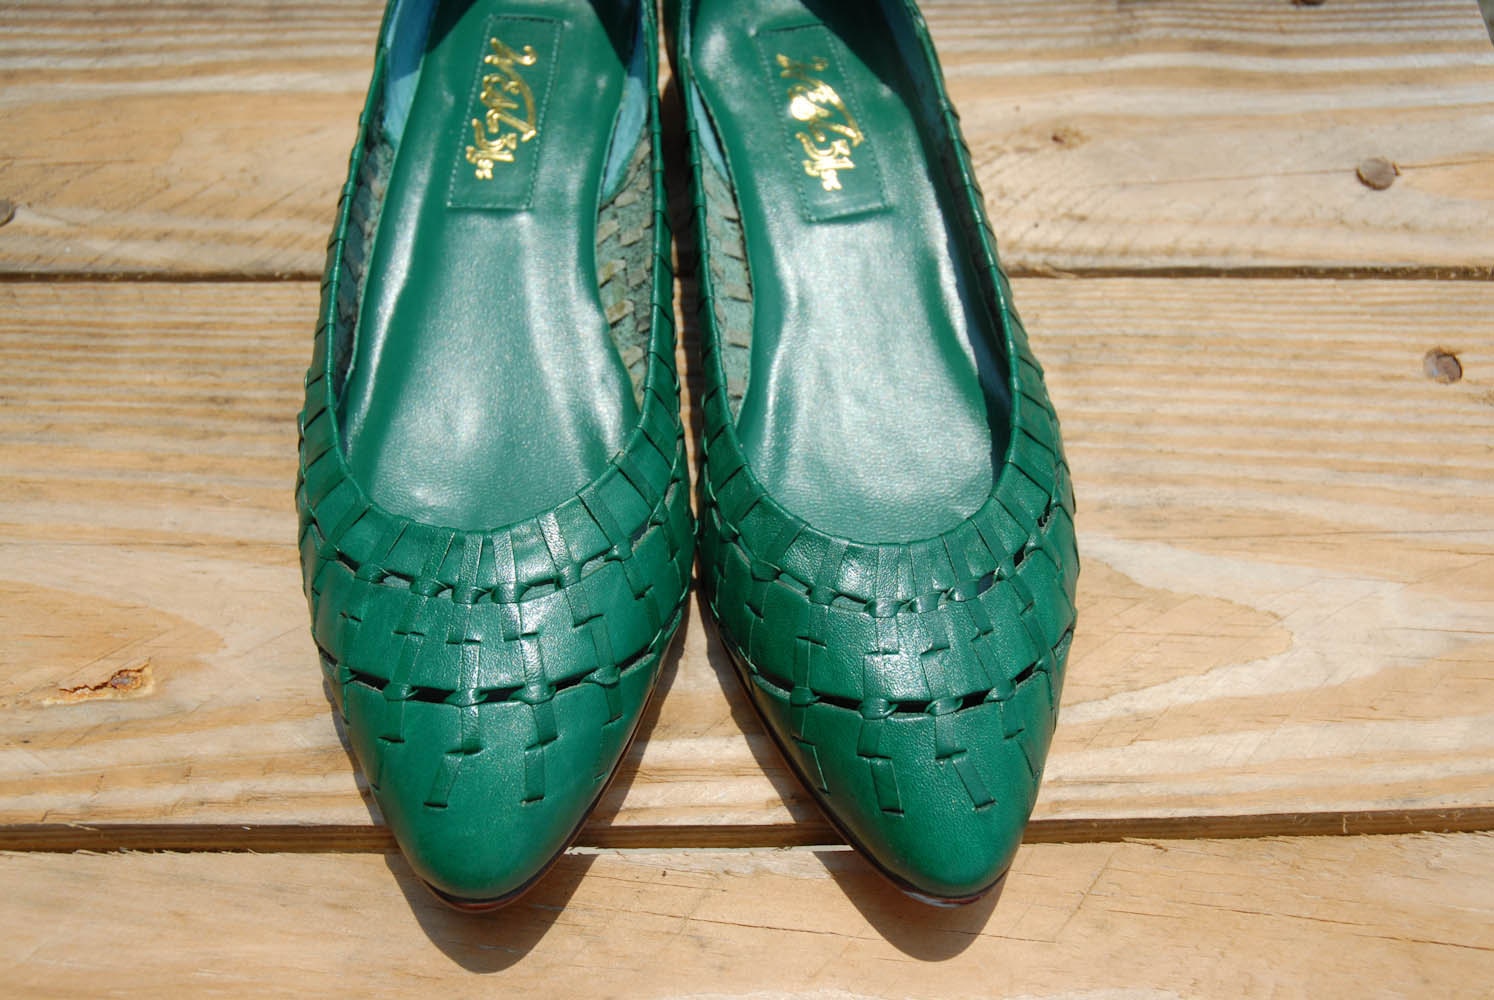 Spanking NEW Green Brogue Flat shoes